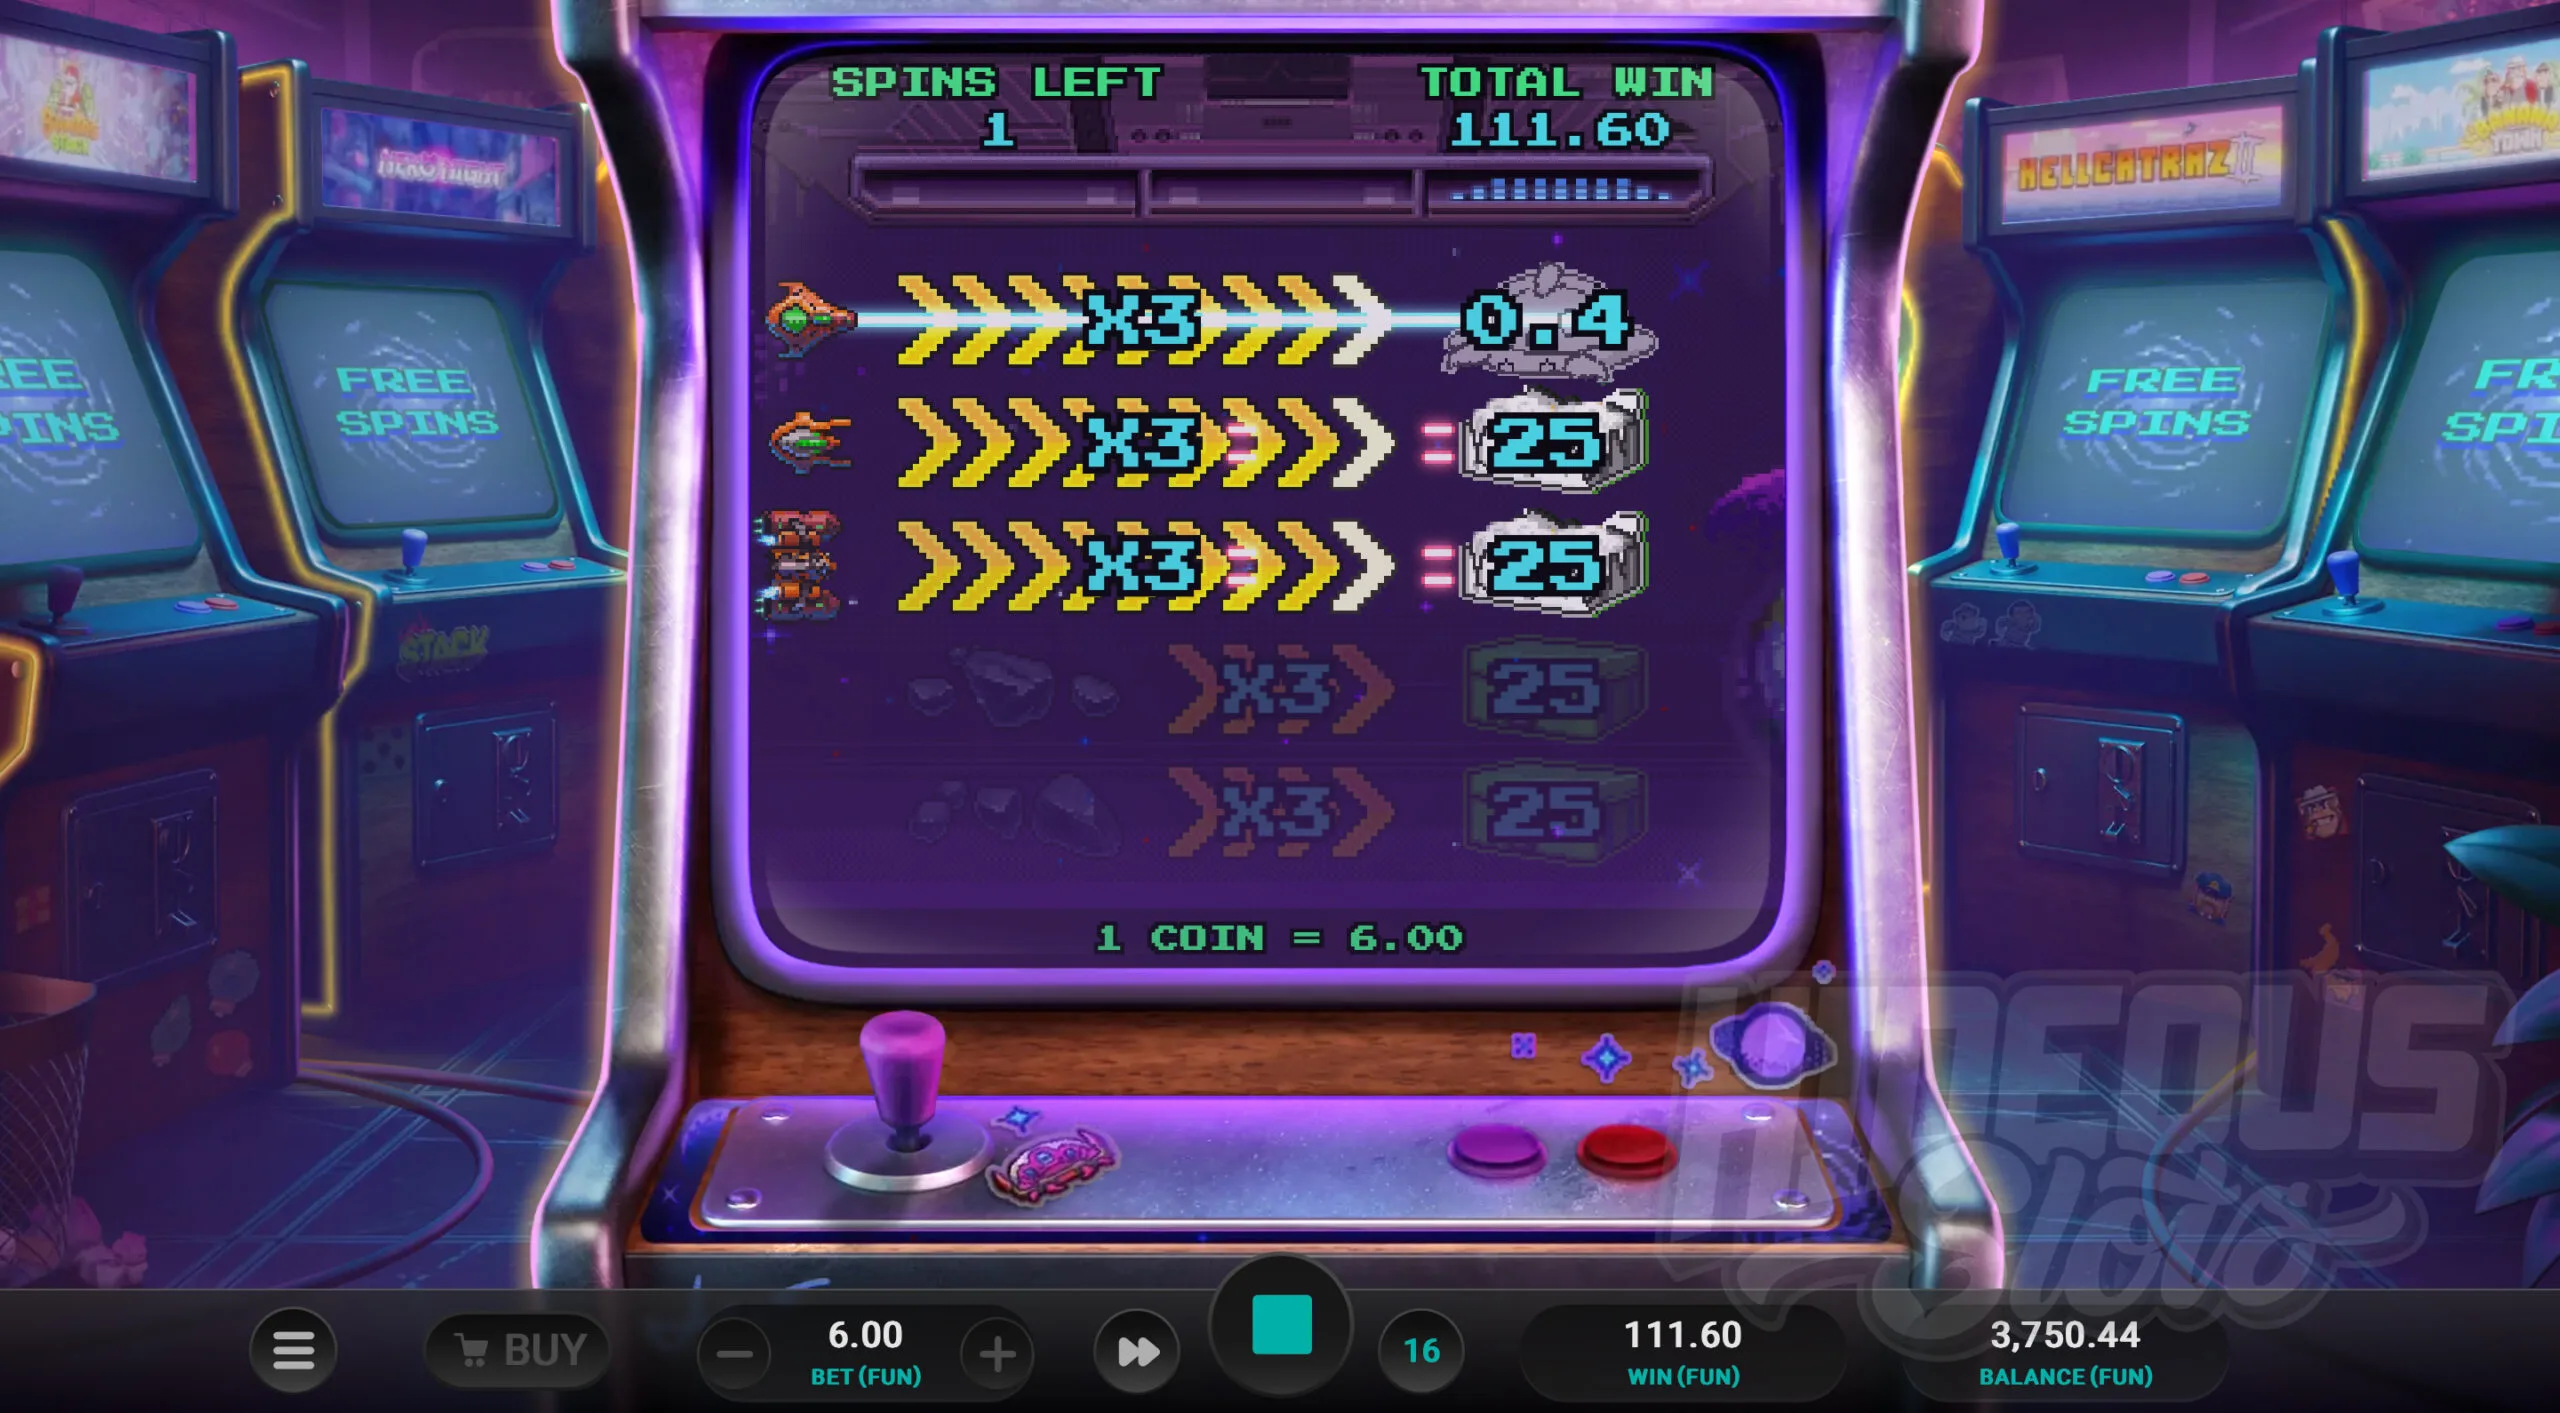 Symbols are Stacked up to 5 Symbols Tall During Free Spins